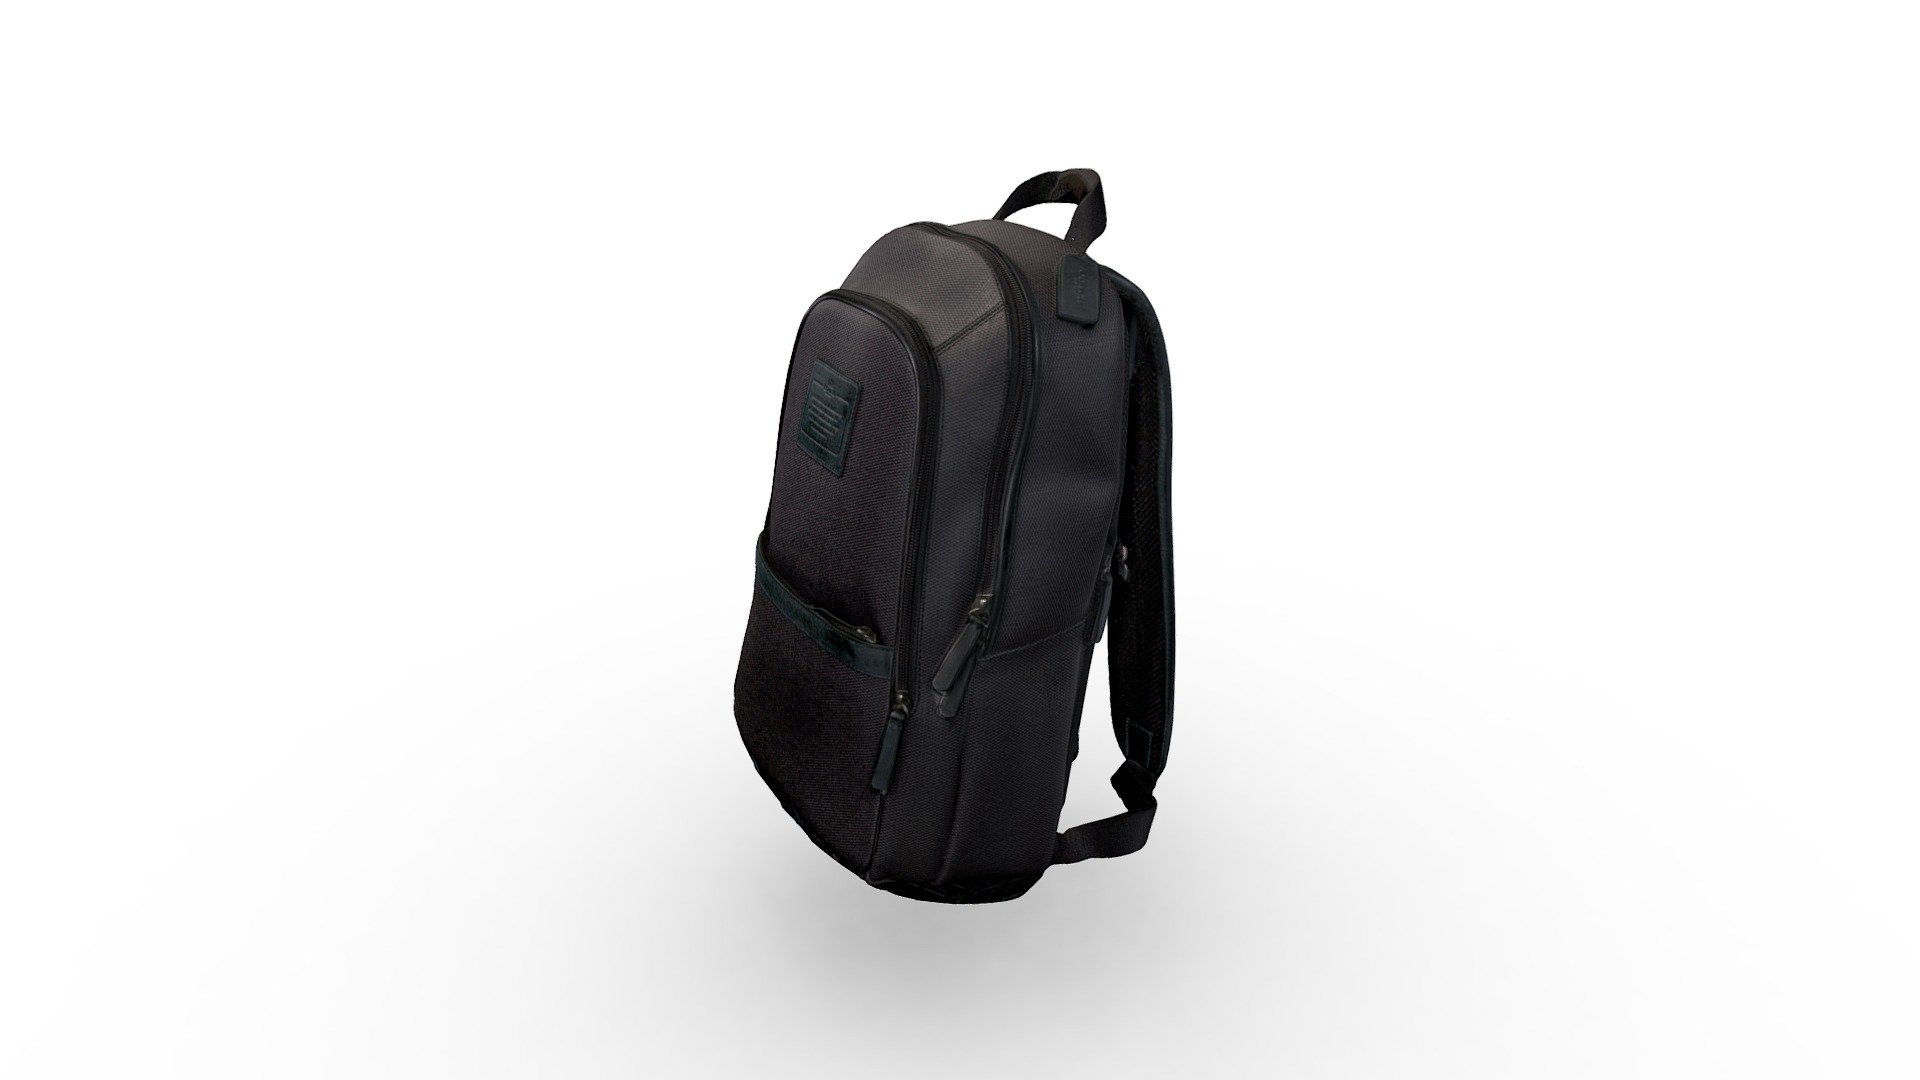 3D scan of Coach Men's Backpack

My first scan of a backpack. It's pretty rough but not too bad. 

Canvas with leather trim Inside zip, cell phone and multifunction pockets Zip closure, fabric lining Outside pocket Top handle Adjustable shoulder straps 9 1/2